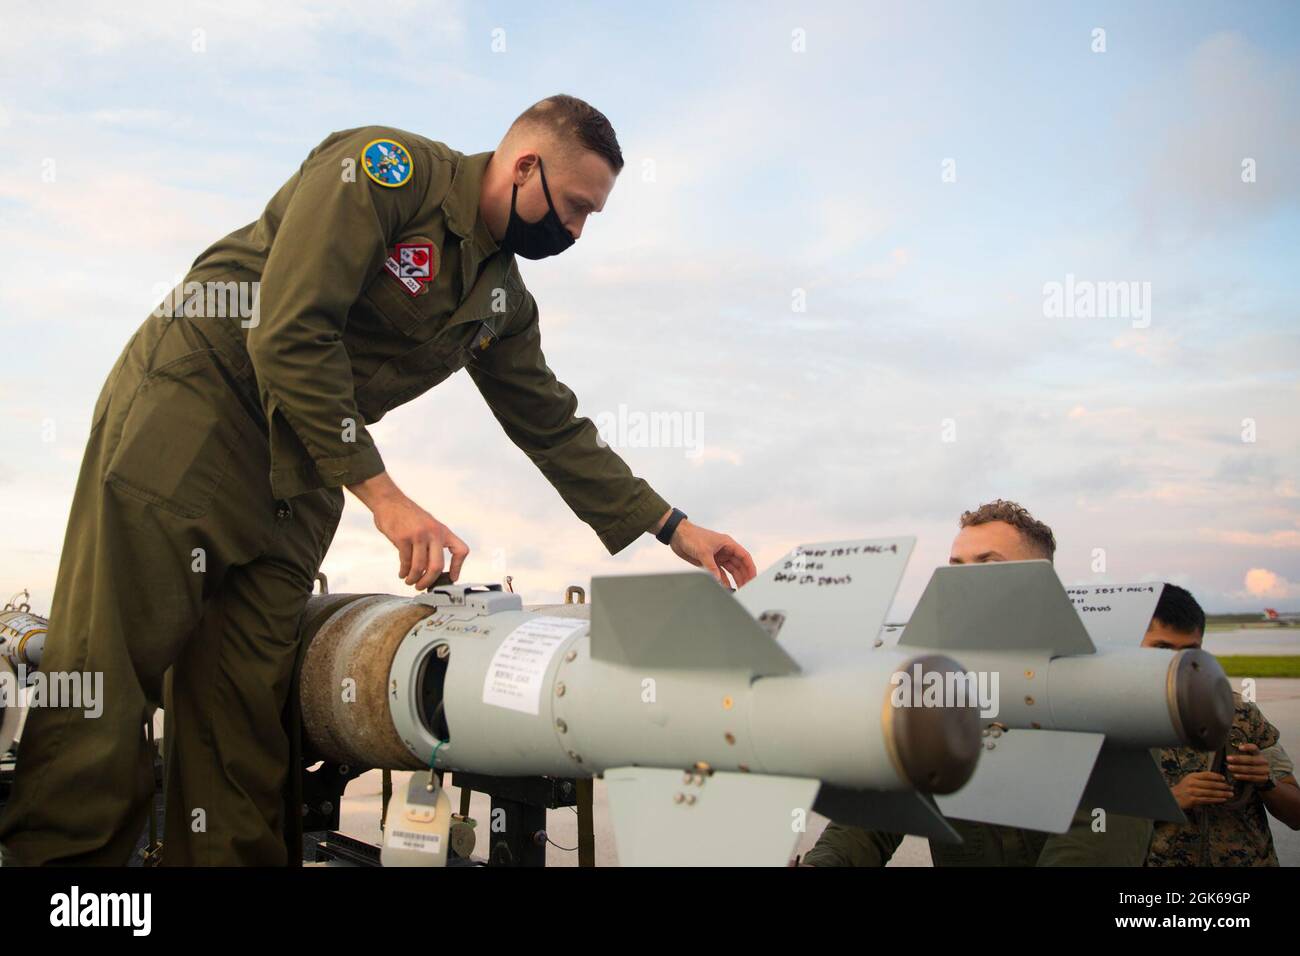 U.S. Marine Corps Staff Sgt. Alex Pratt, an aircraft ordnance technician with Marine Fighter Attack Squadron (VMFA) 232 inspects a GBU-38 Joint Direct Attack Munition at Andersen Air Force Base, Guam, Aug. 13, 2021. VMFA-232 deployed to Andersen Air Force Base, Guam as part of the Aviation Training Relocation program, which is designed to increase operational readiness while reducing the impacts of training activities. Stock Photo